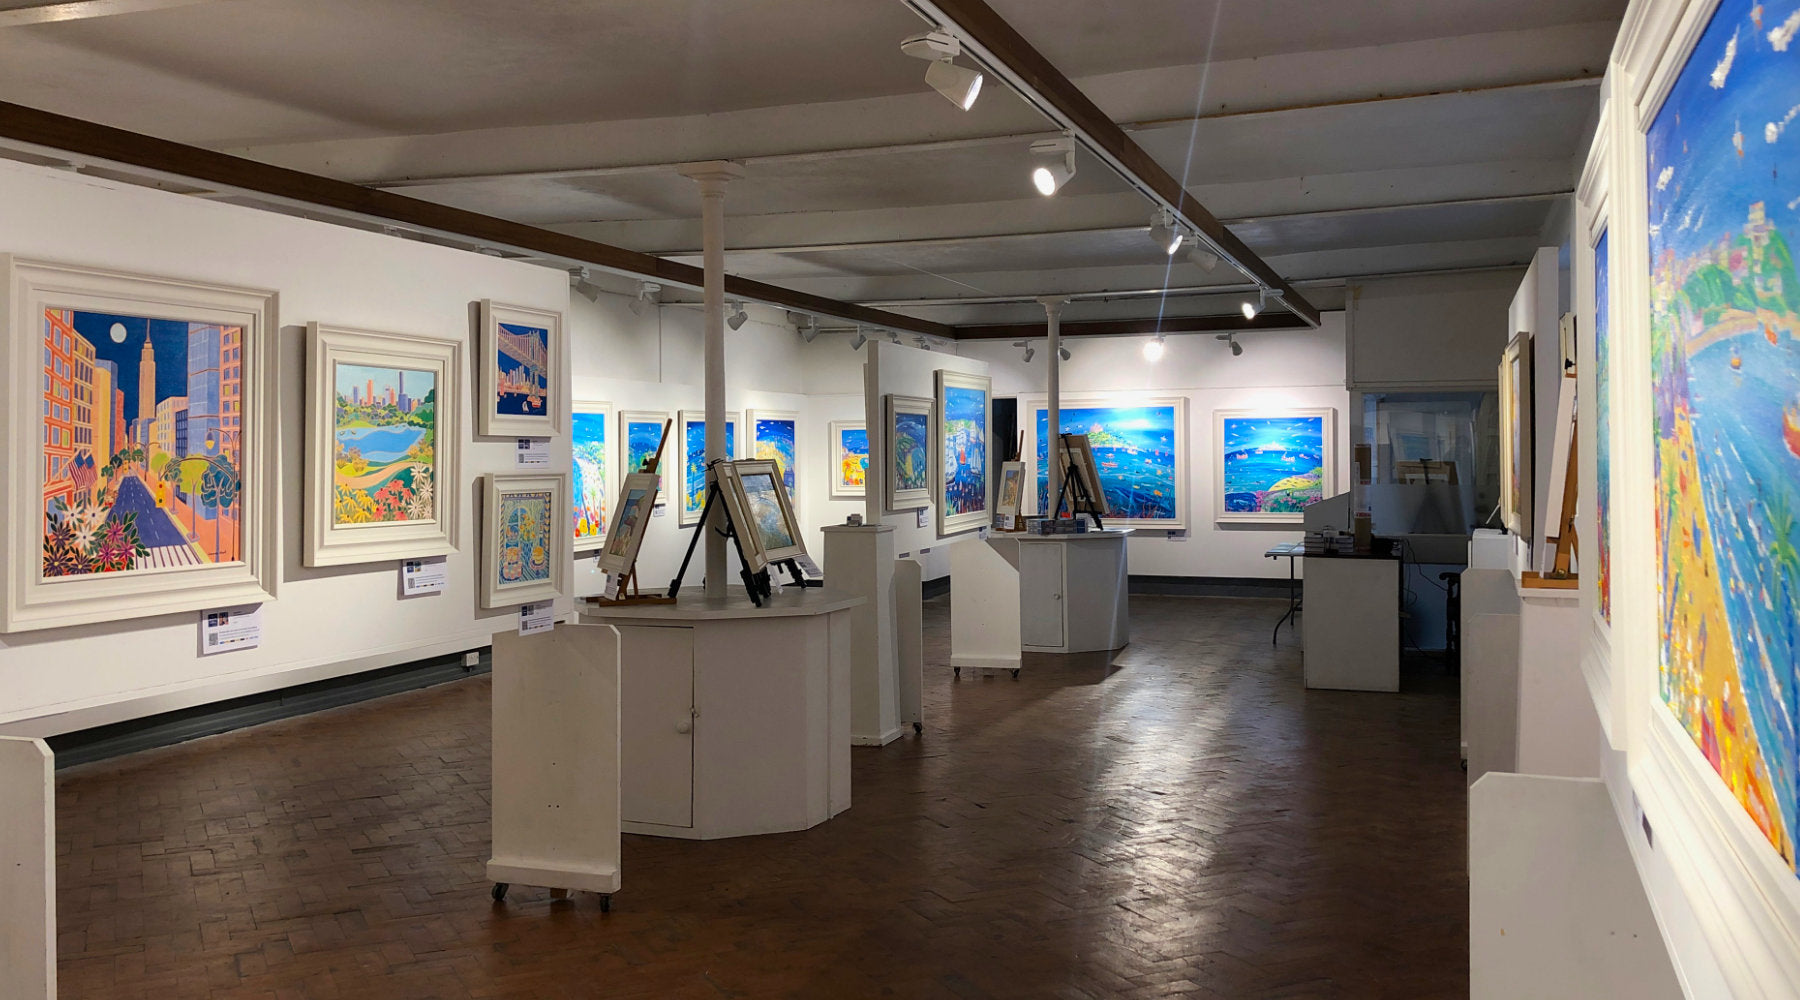 A John Dyer Gallery exhibition on display in the Crypt Gallery, St Ives Society of Artists